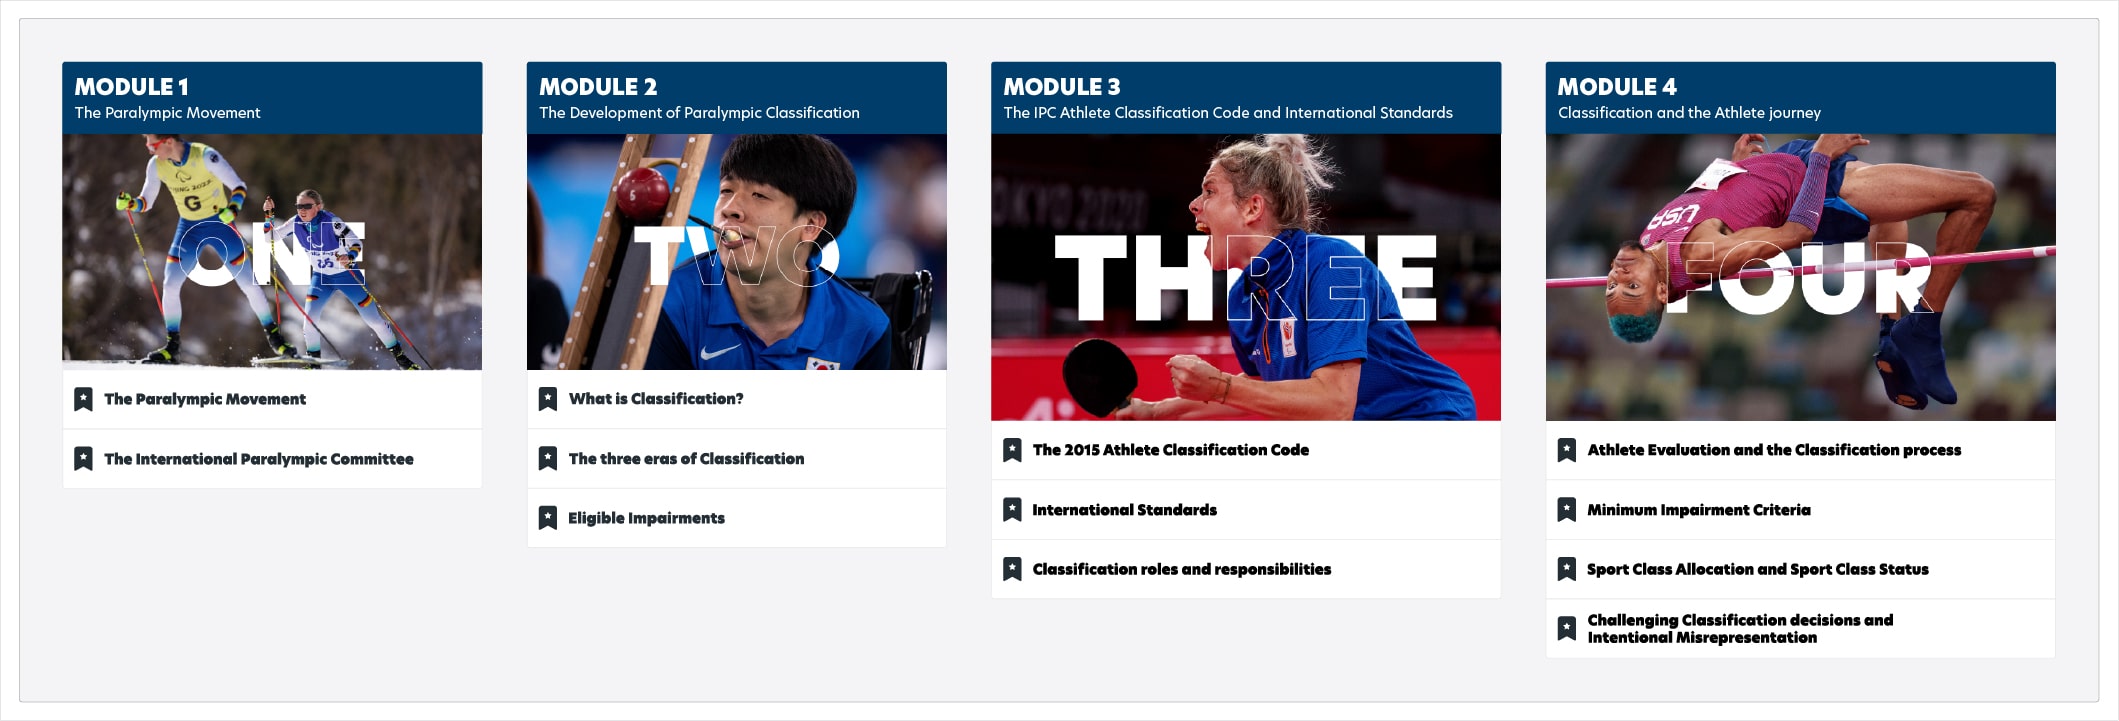 The four modules of the Classification Fundamentals online course, including 'The Paralympic Movement', 'The Development of Paralympic Classification', 'The IPC Athlete Classification Code and International Standards', and 'Classification and the Athlete journey'.